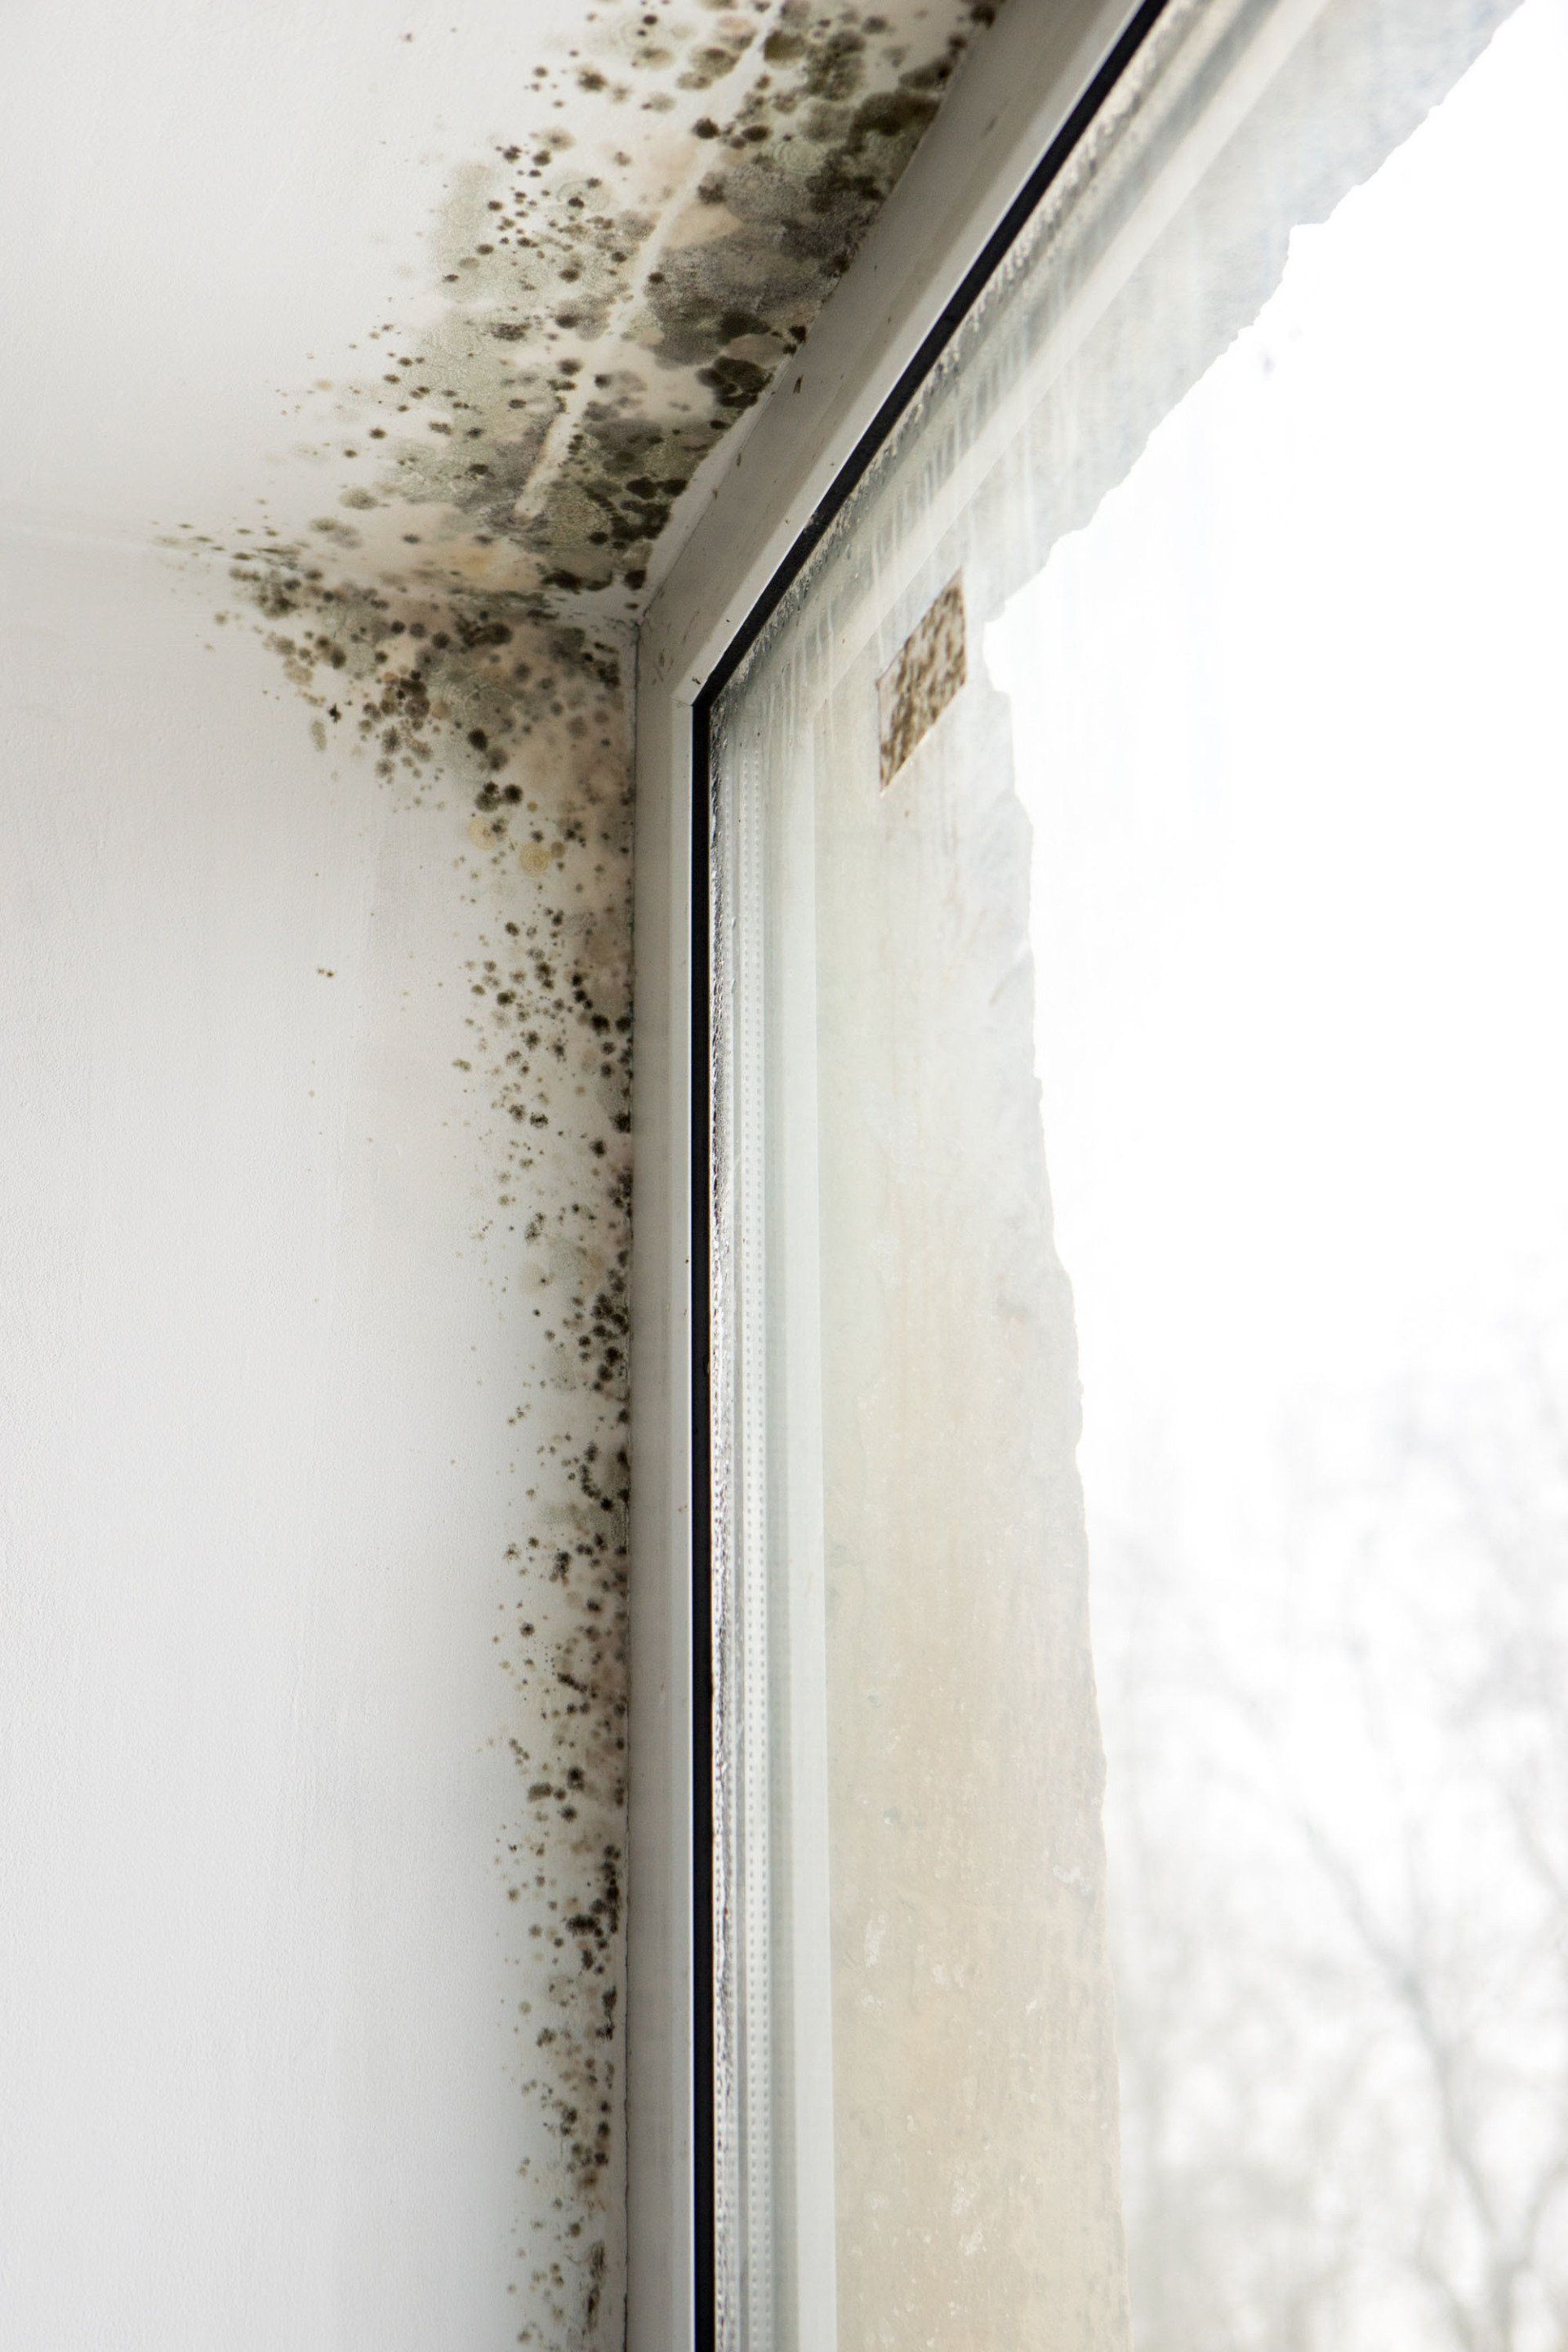 mold inspection services